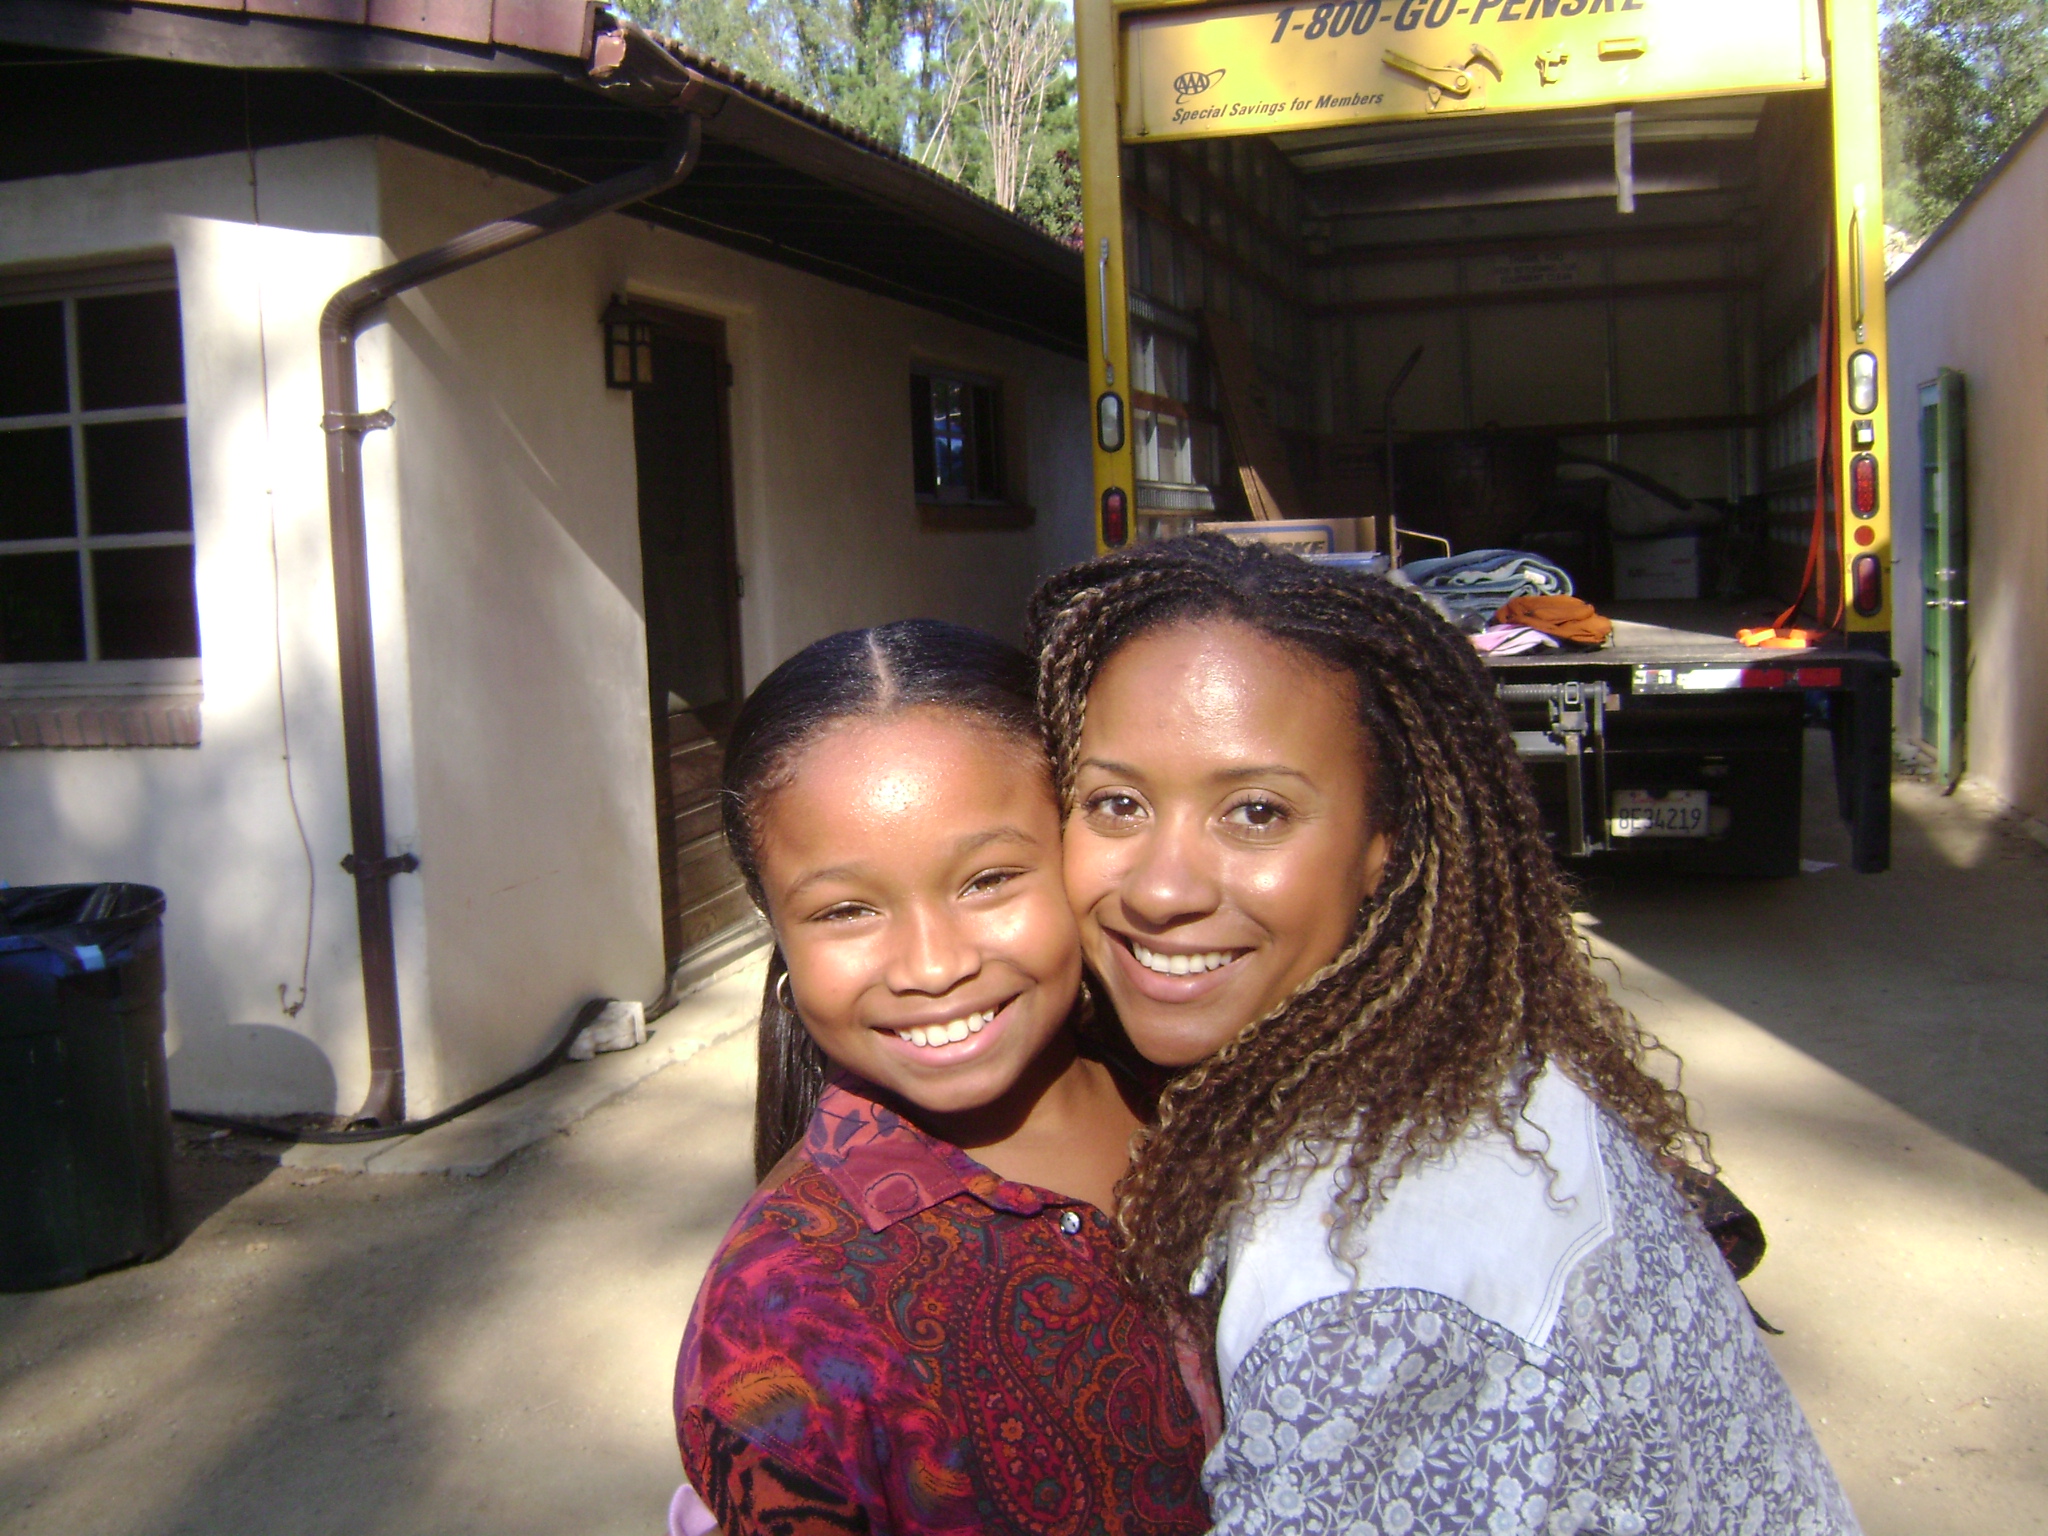 Kiara with Tracie Thoms on the set of the movie 